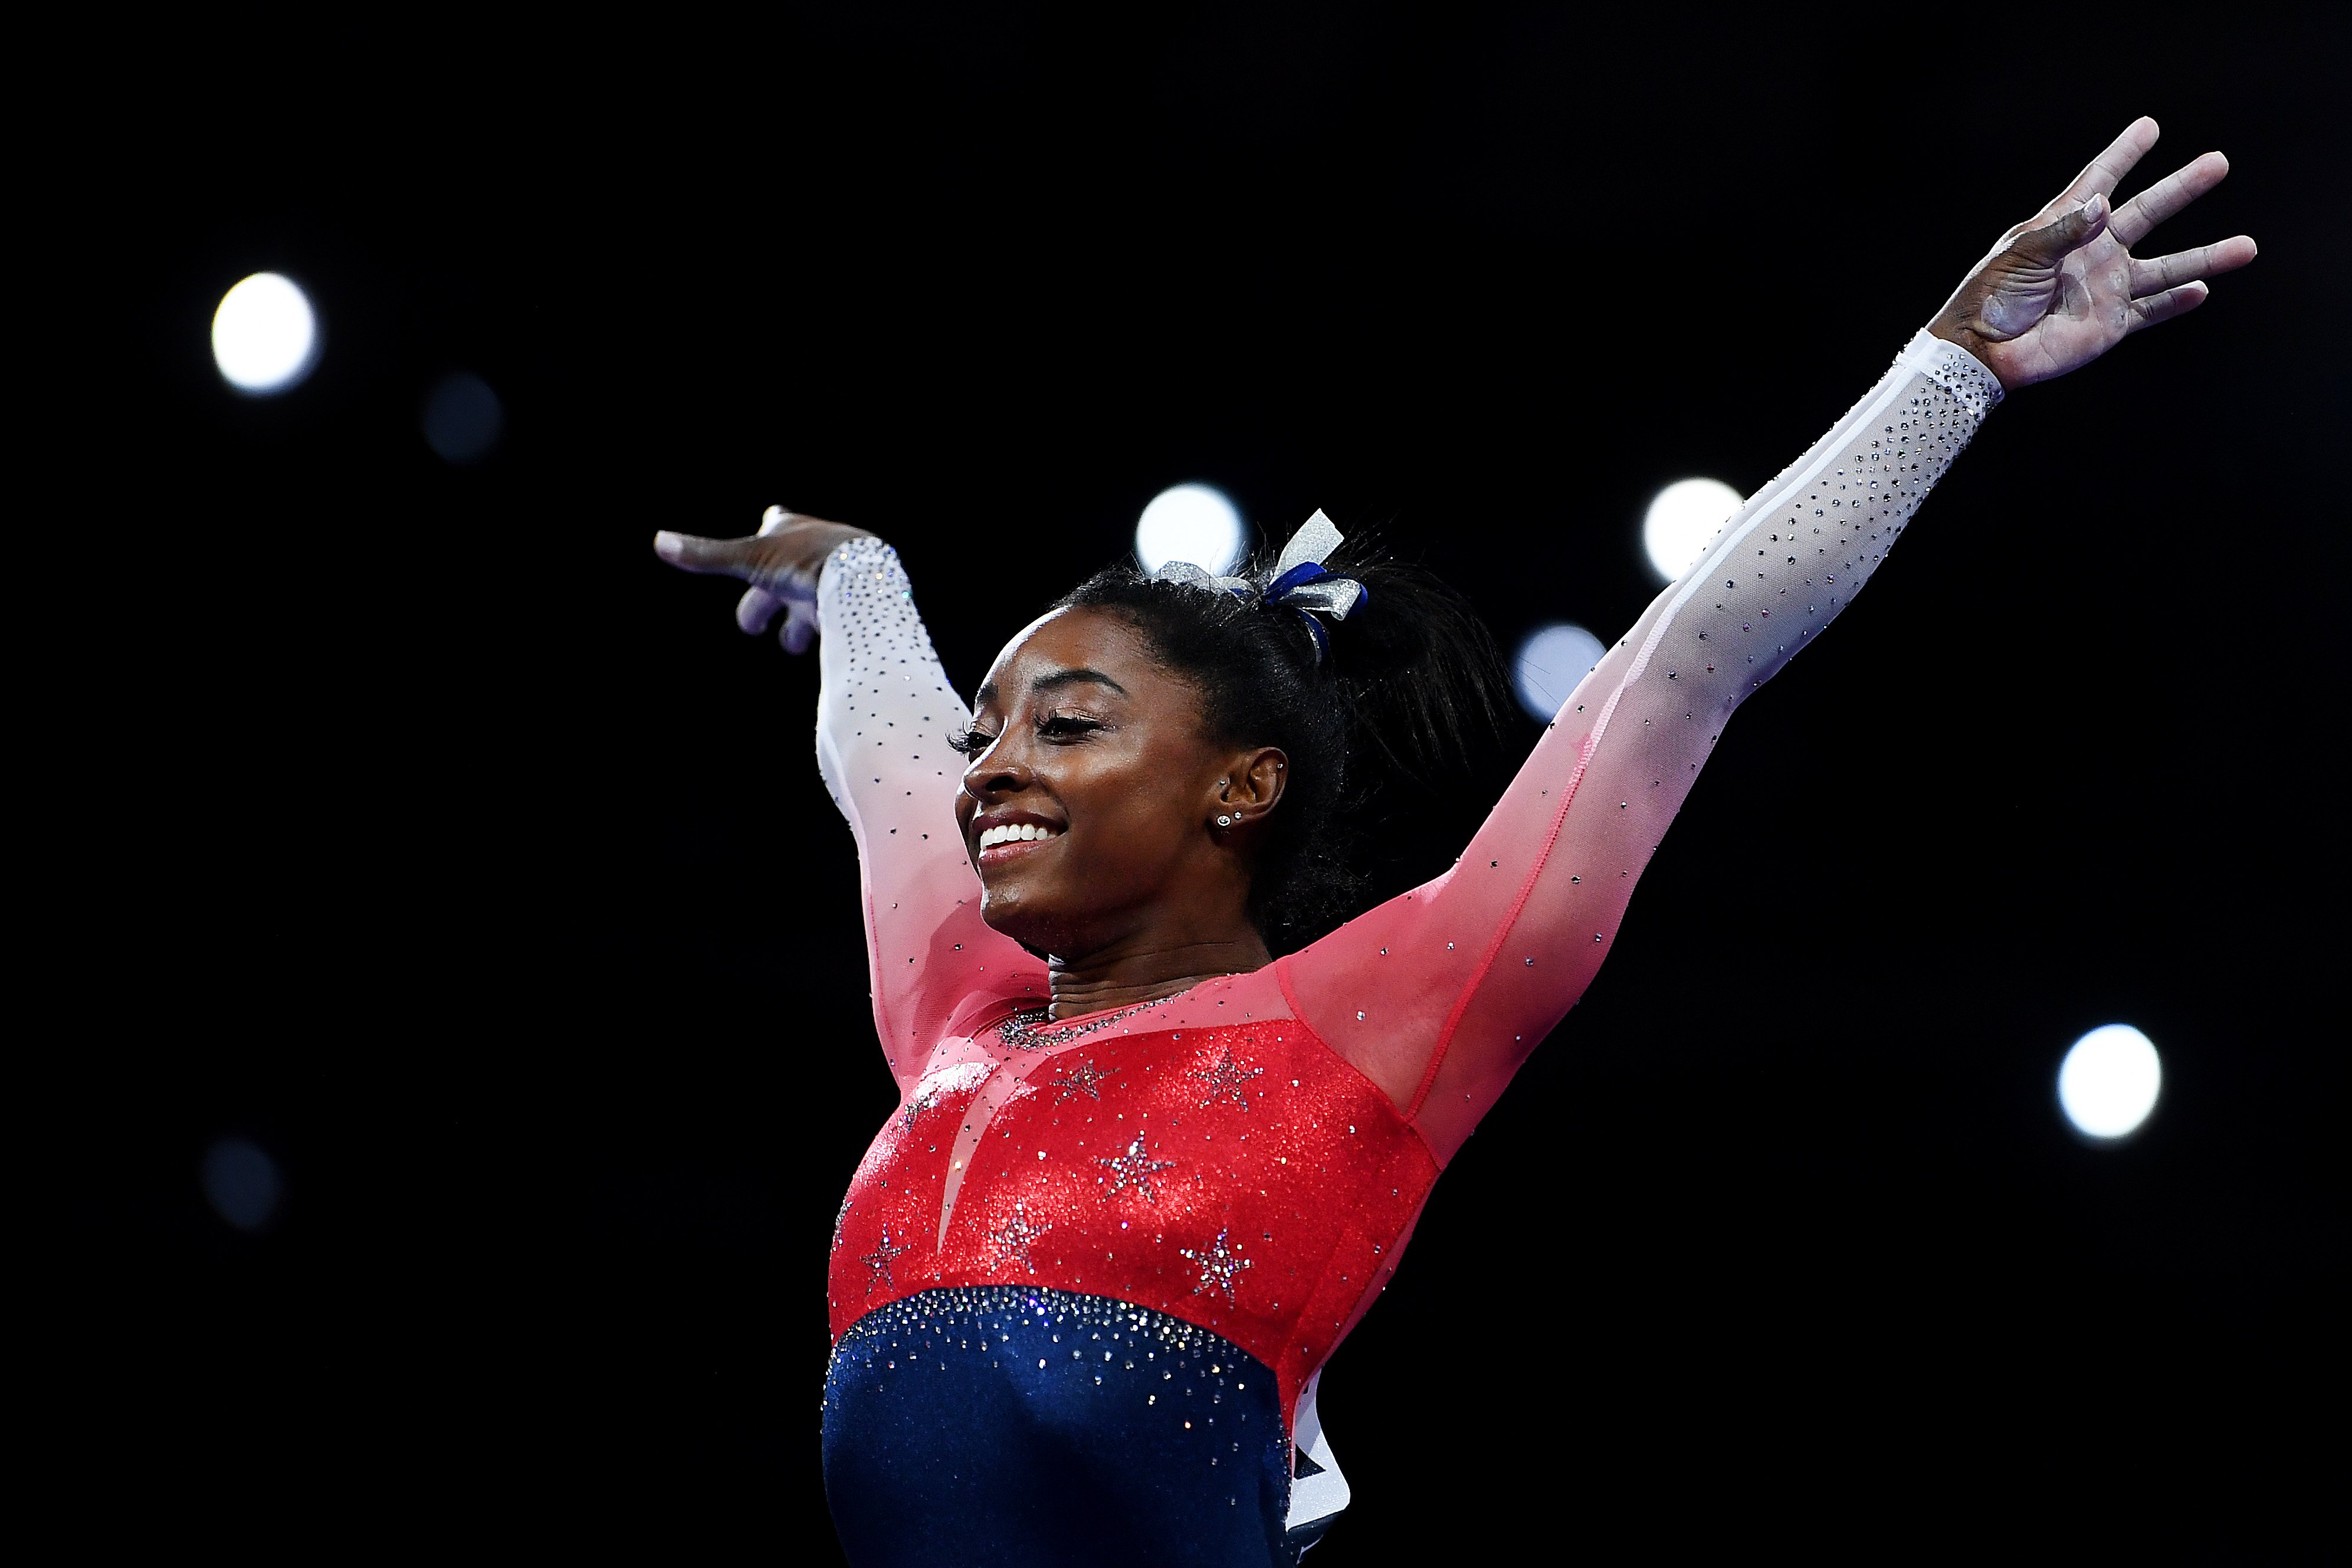 Simone Biles of USA at the FIG Artistic Gymnastics World Championships on October 08, 2019 in Stuttgart, Germany.| Source: Getty Images